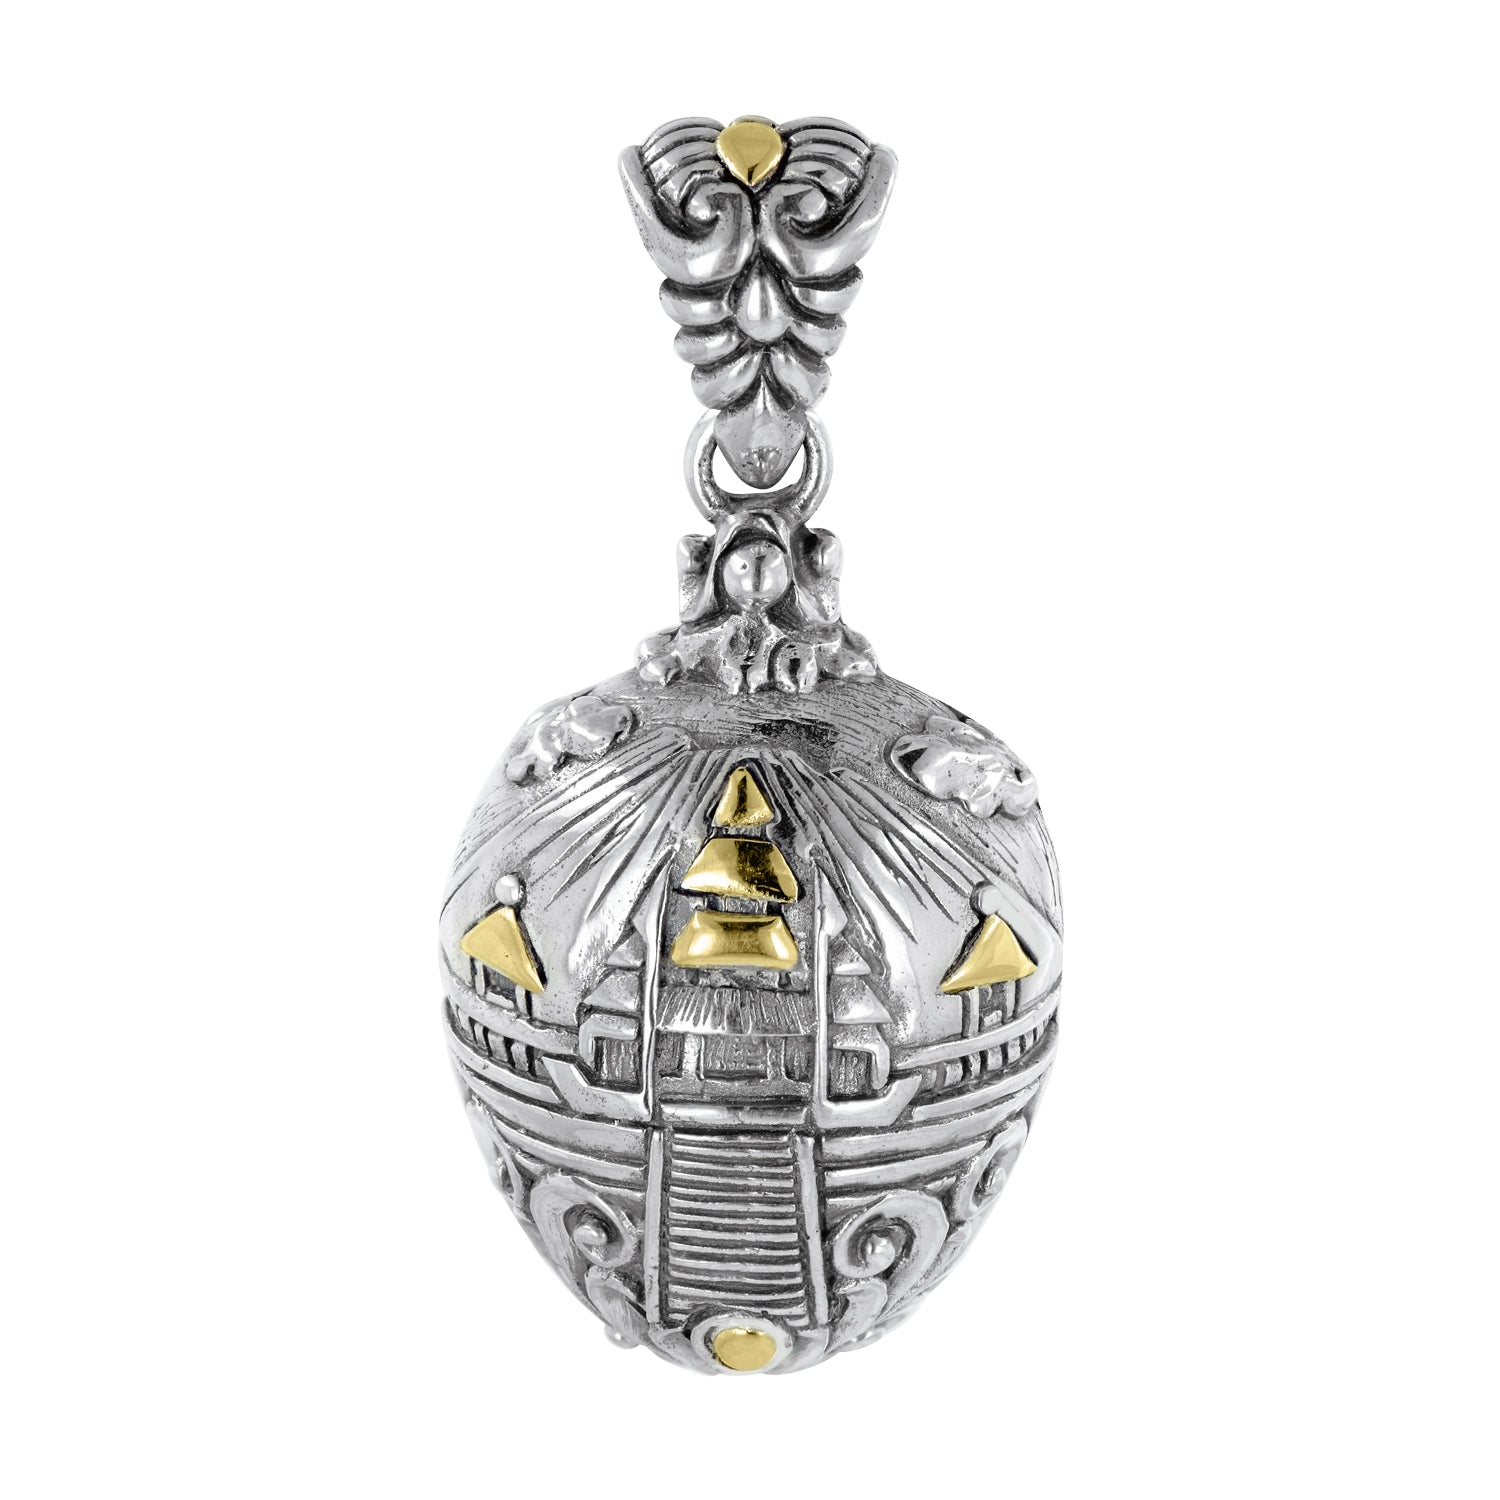 Bali Sterling Silver Besakih Temple Amulet Pendant with 18K Gold Accents